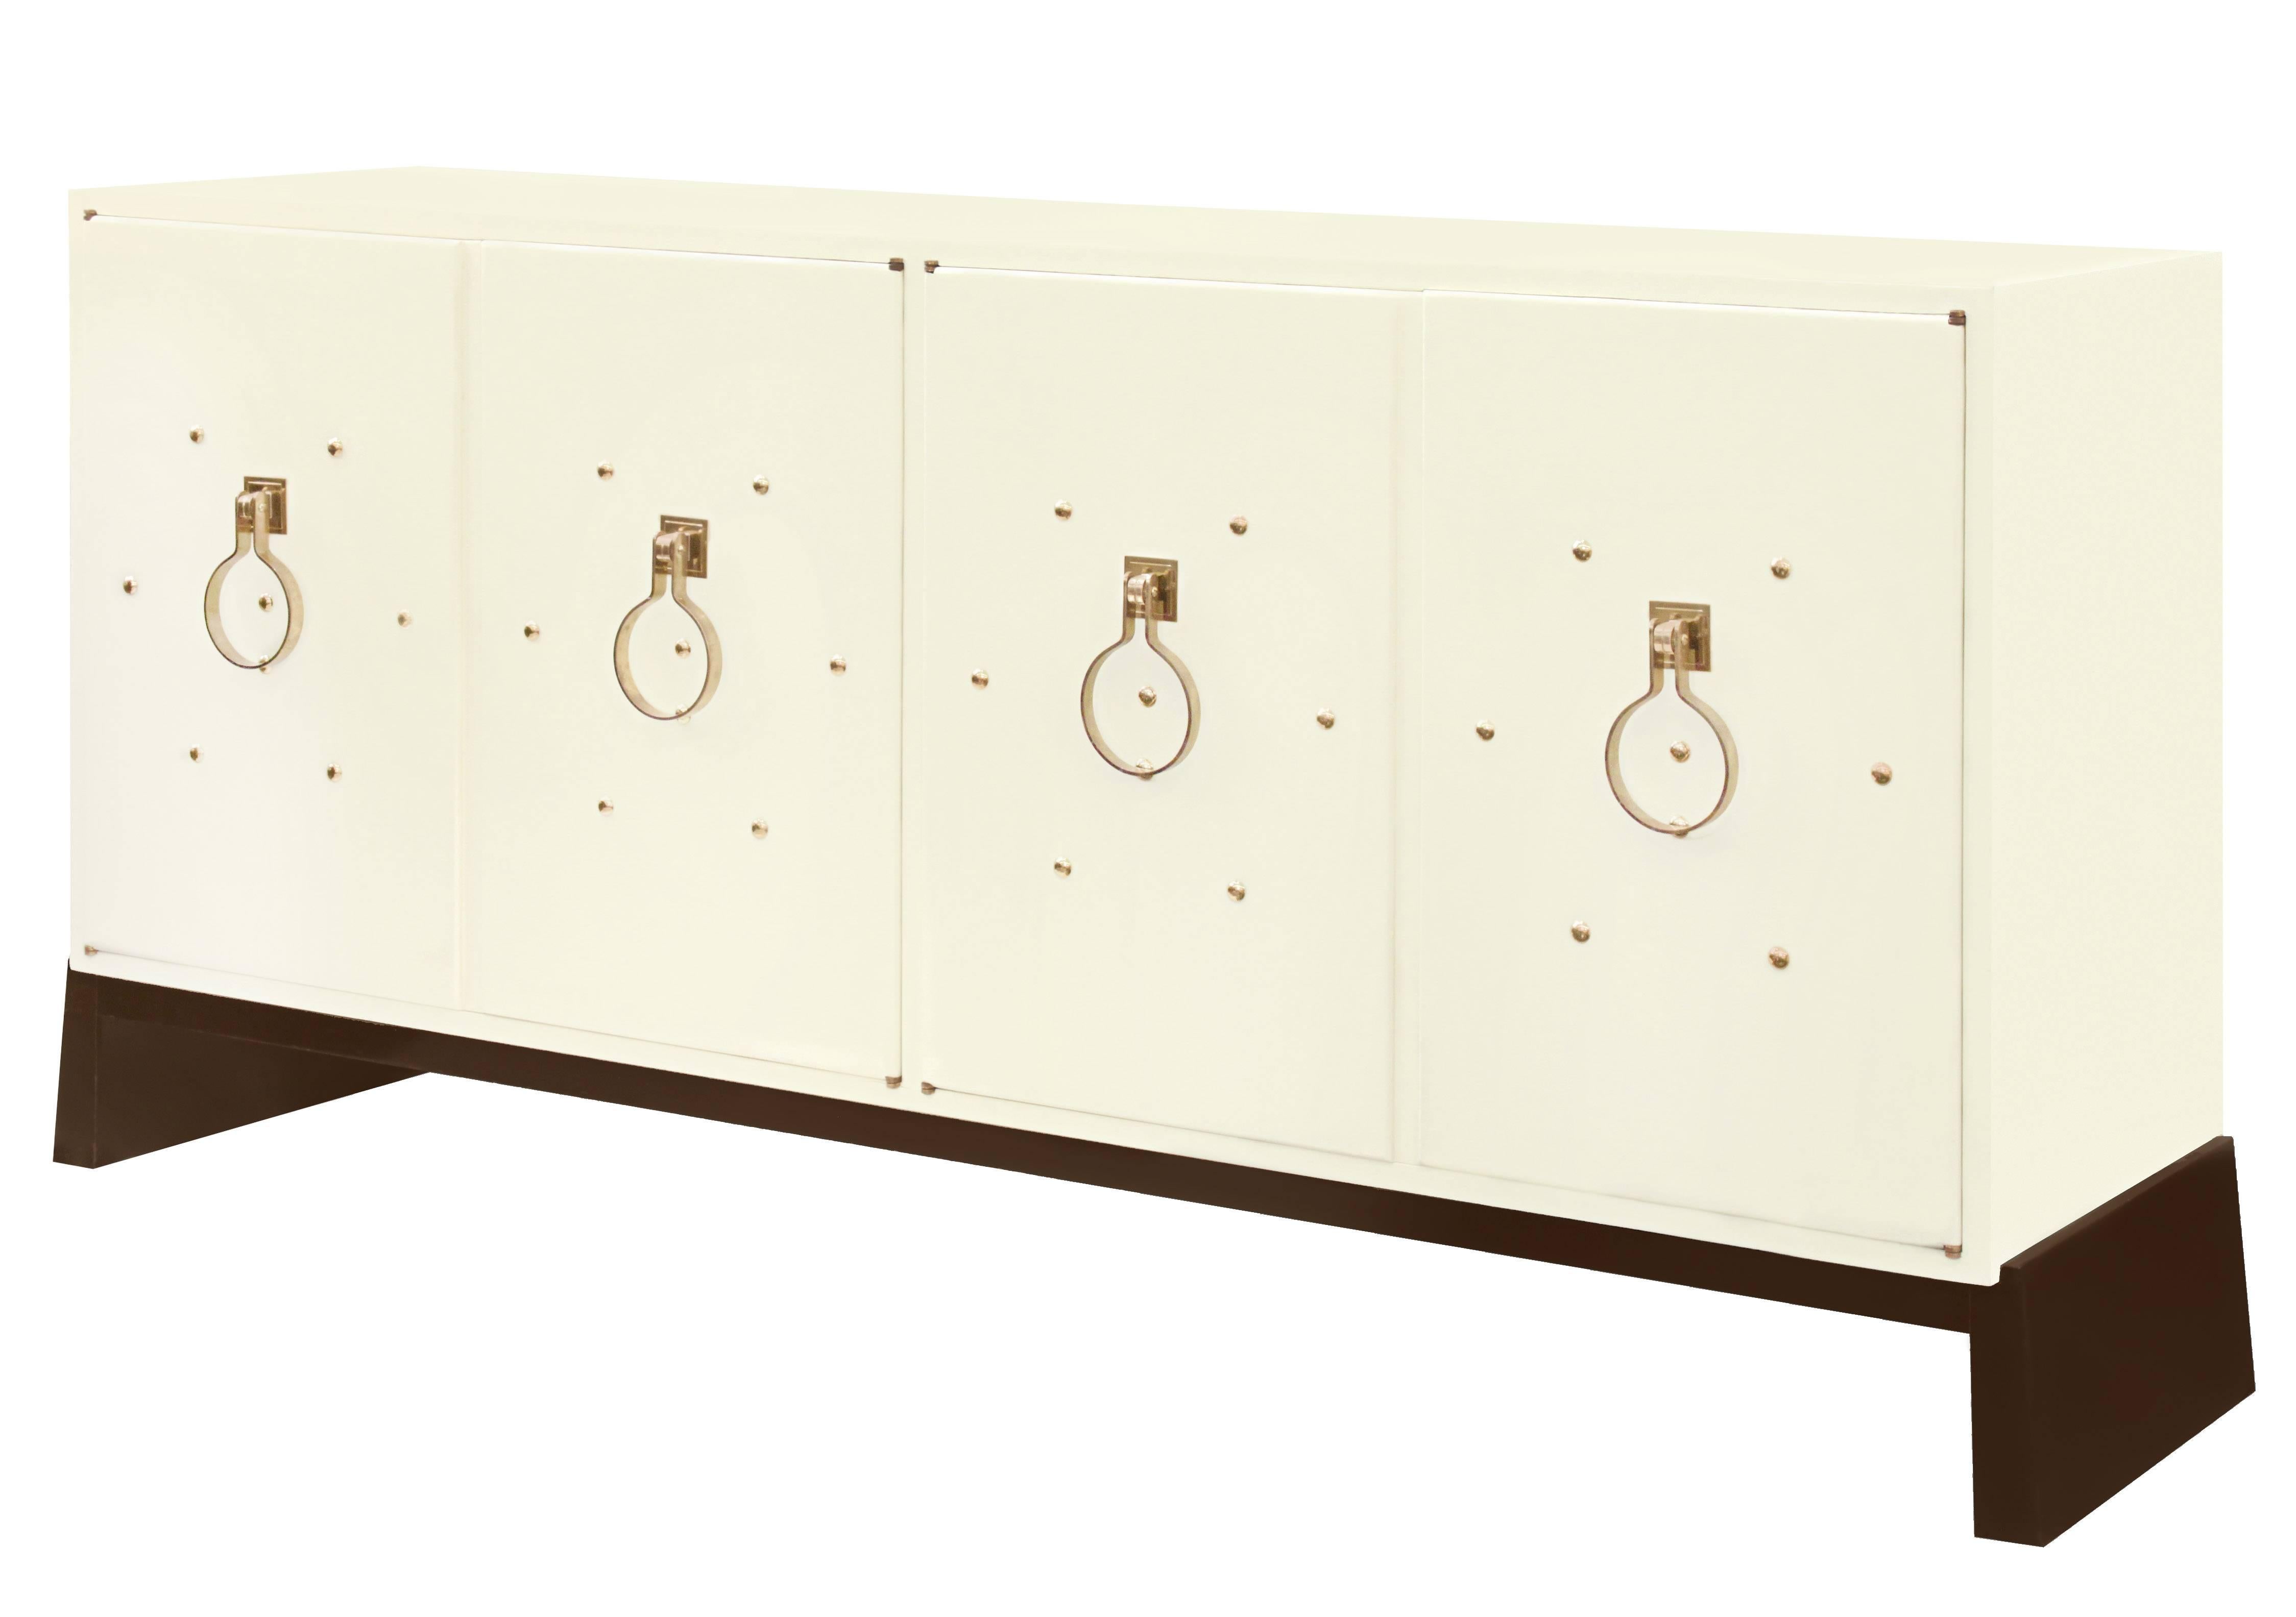 Exceptional four-door credenza in ivory lacquer with brass studs and iconic pulls on a dark mahogany base by Tommi Parzinger for Parzinger Originals, American 1950s (signed “Parzinger Originals” in drawer). This is a beautiful example of Parzinger's